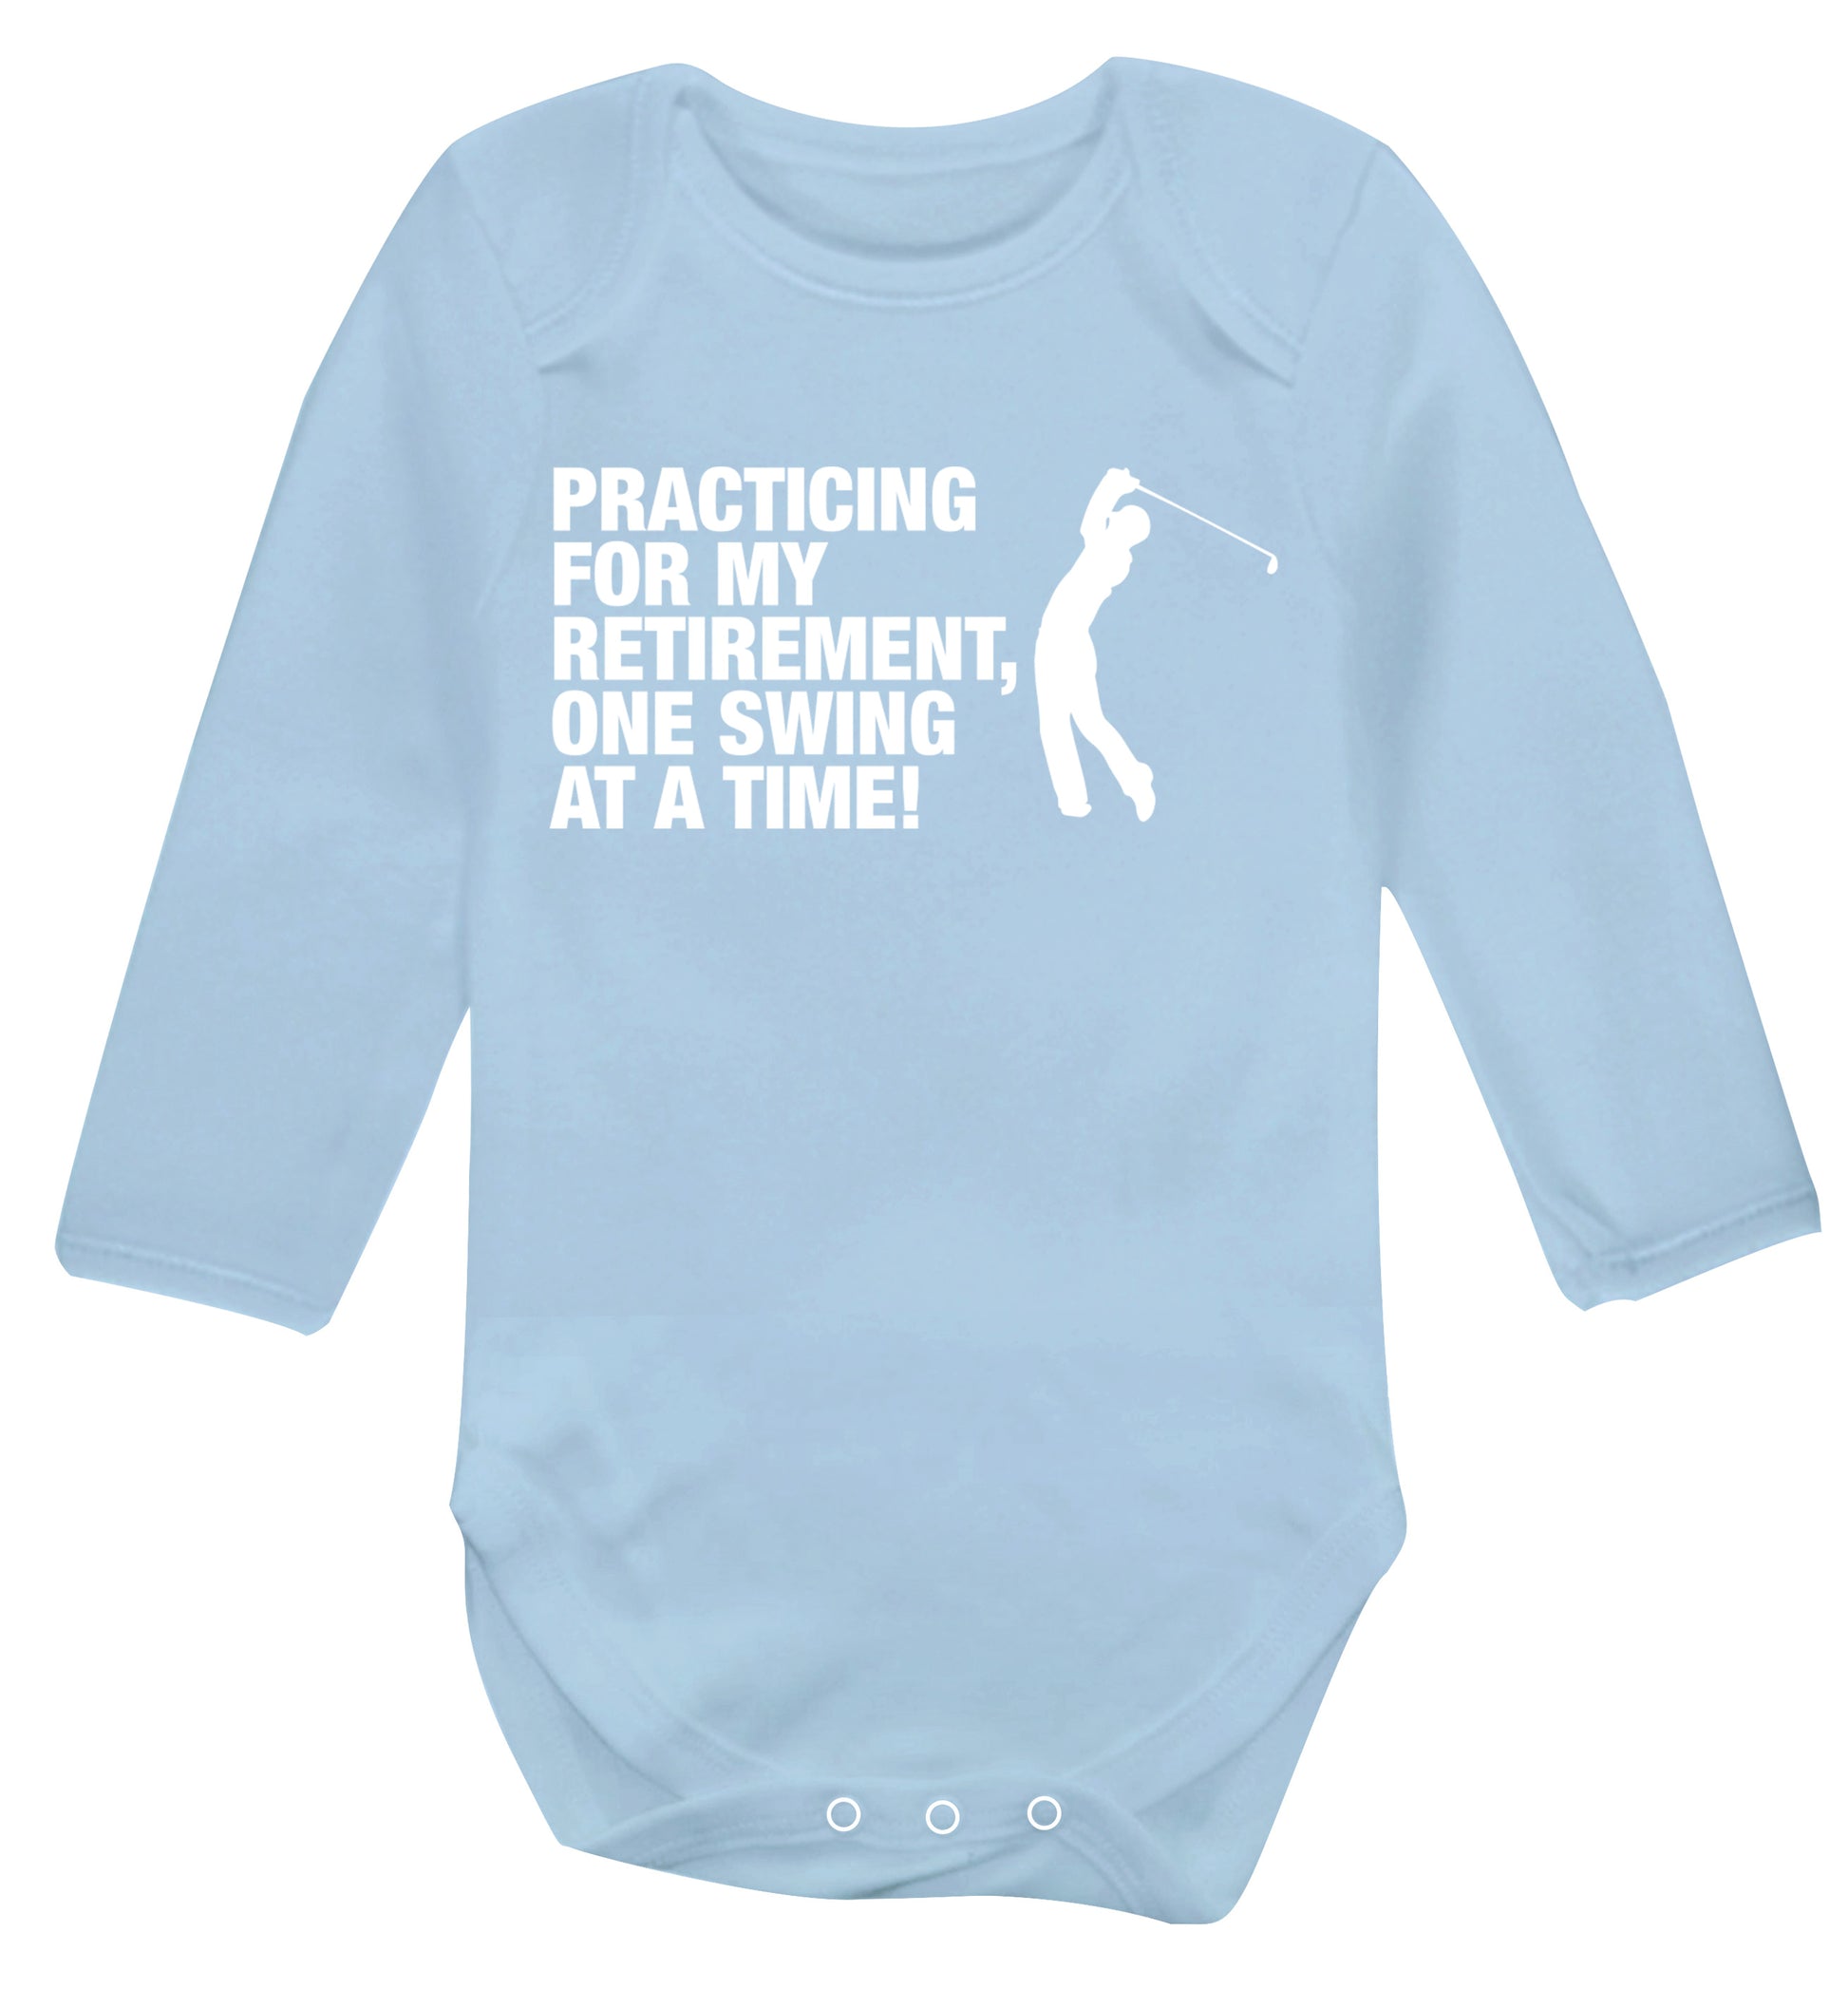 Practicing for my retirement one swing at a time Baby Vest long sleeved pale blue 6-12 months